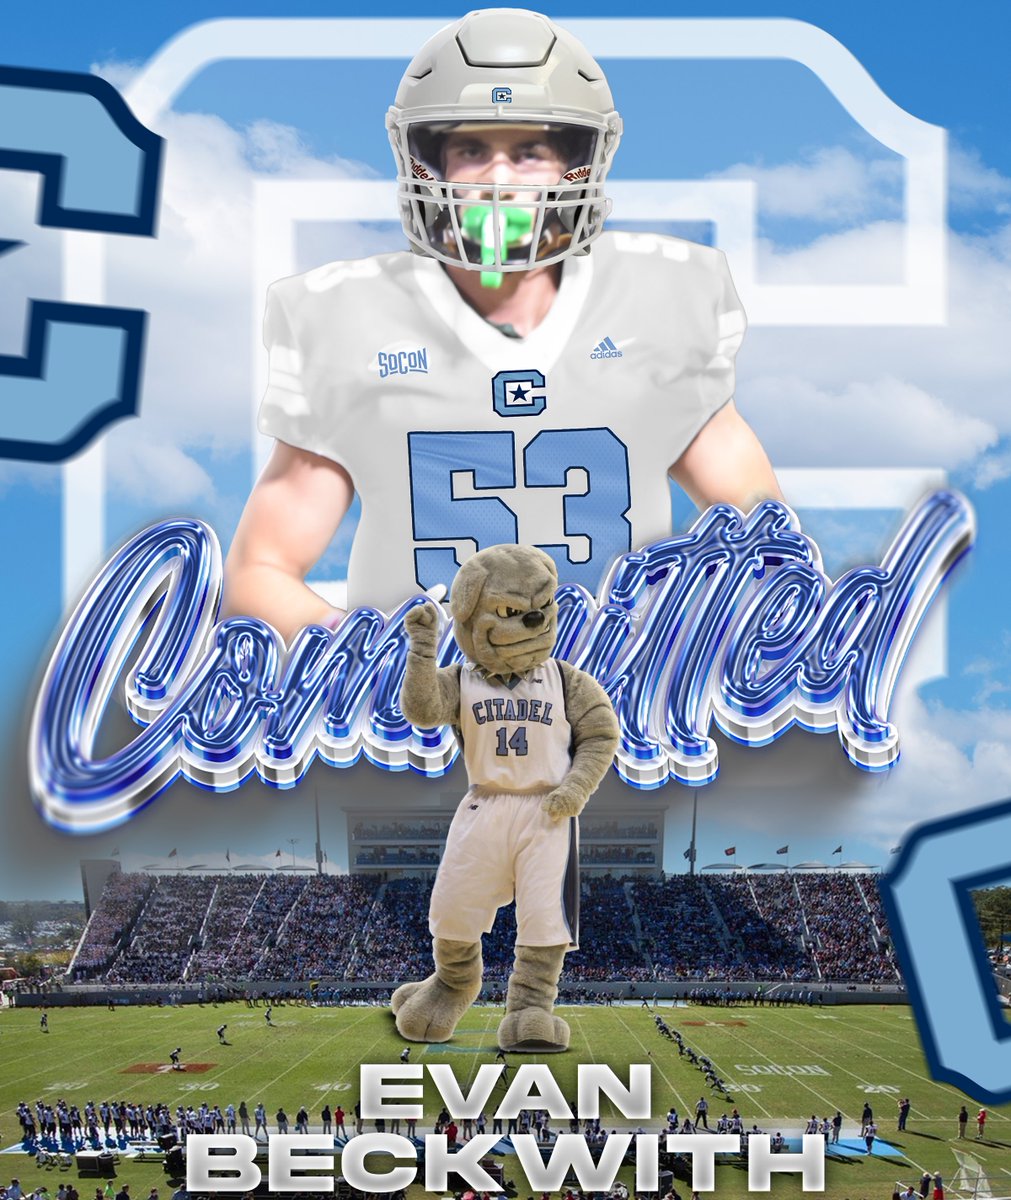 #AGTG blessed to make my commitment to The Citadel @BenLippenSports @BenLippenFB @silverbacknati1 @CoachBWeigle @coachdannylewis